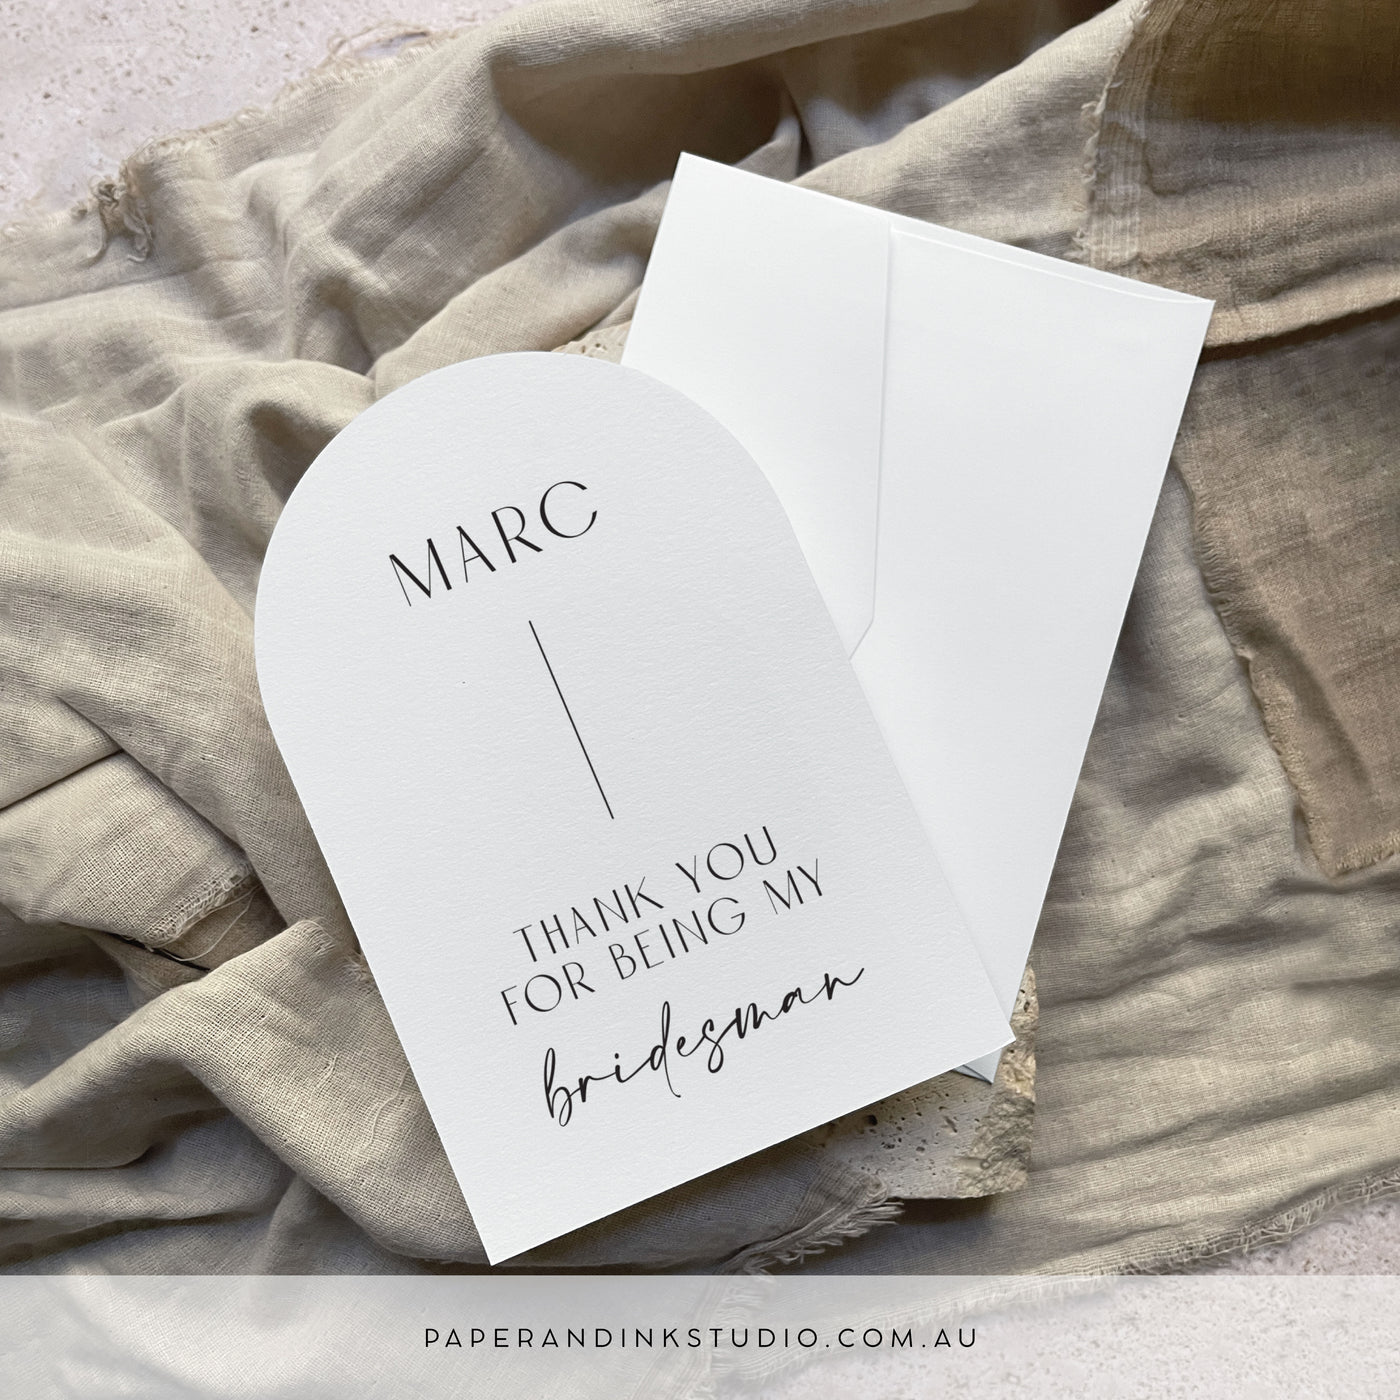 A flat white arch shaped card that can be personalised with the receiver's name, to thank them for being a part of of the couple's wedding party. This one says thank you for being my bridesman.